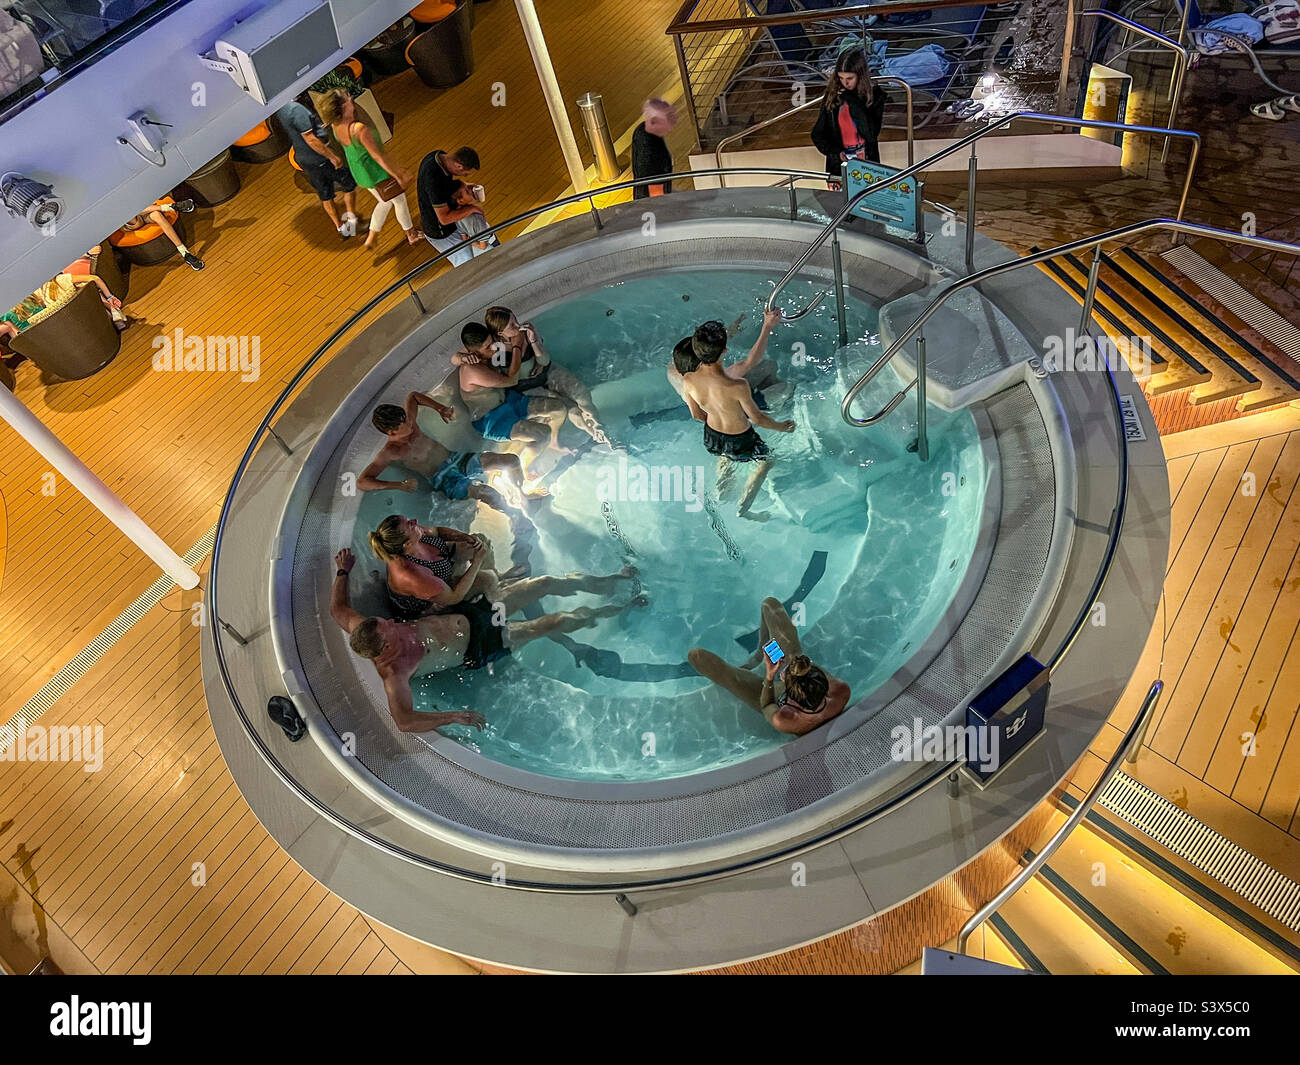 Jacuzzi whirlpool onboard cruise ship at night Stock Photo